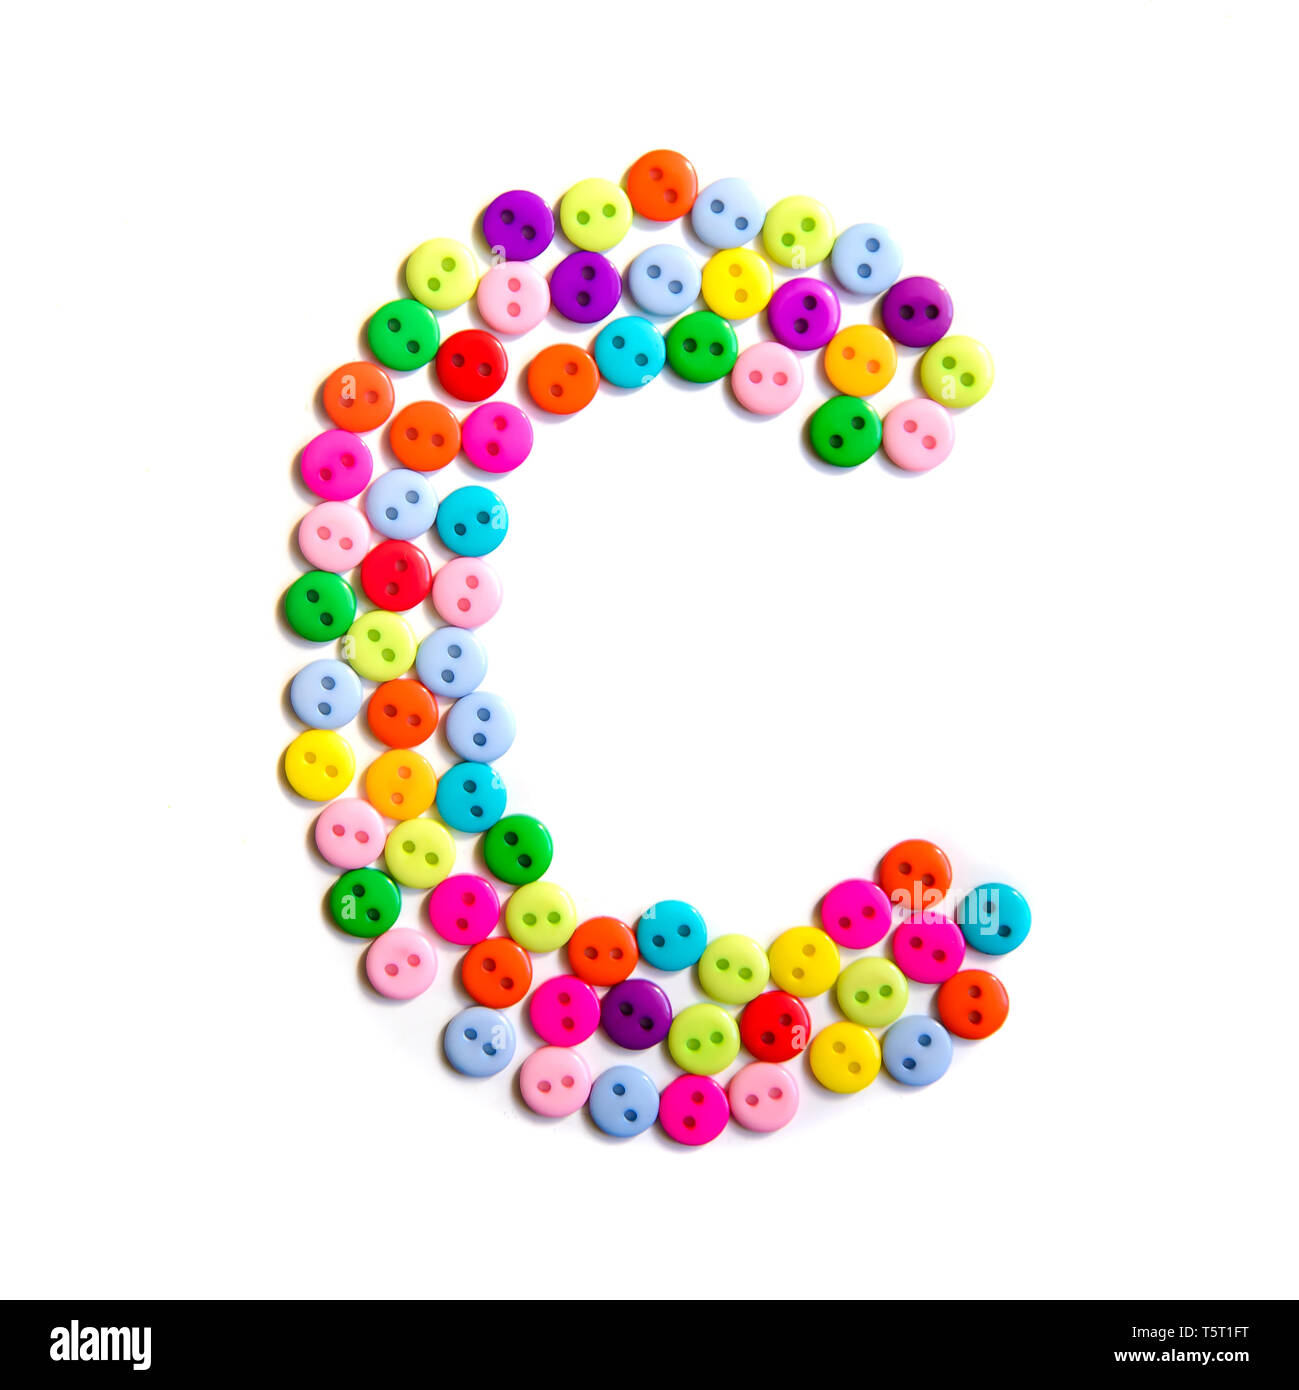 Letter C of the English alphabet from a group of colorful small buttons on a white background Stock Photo